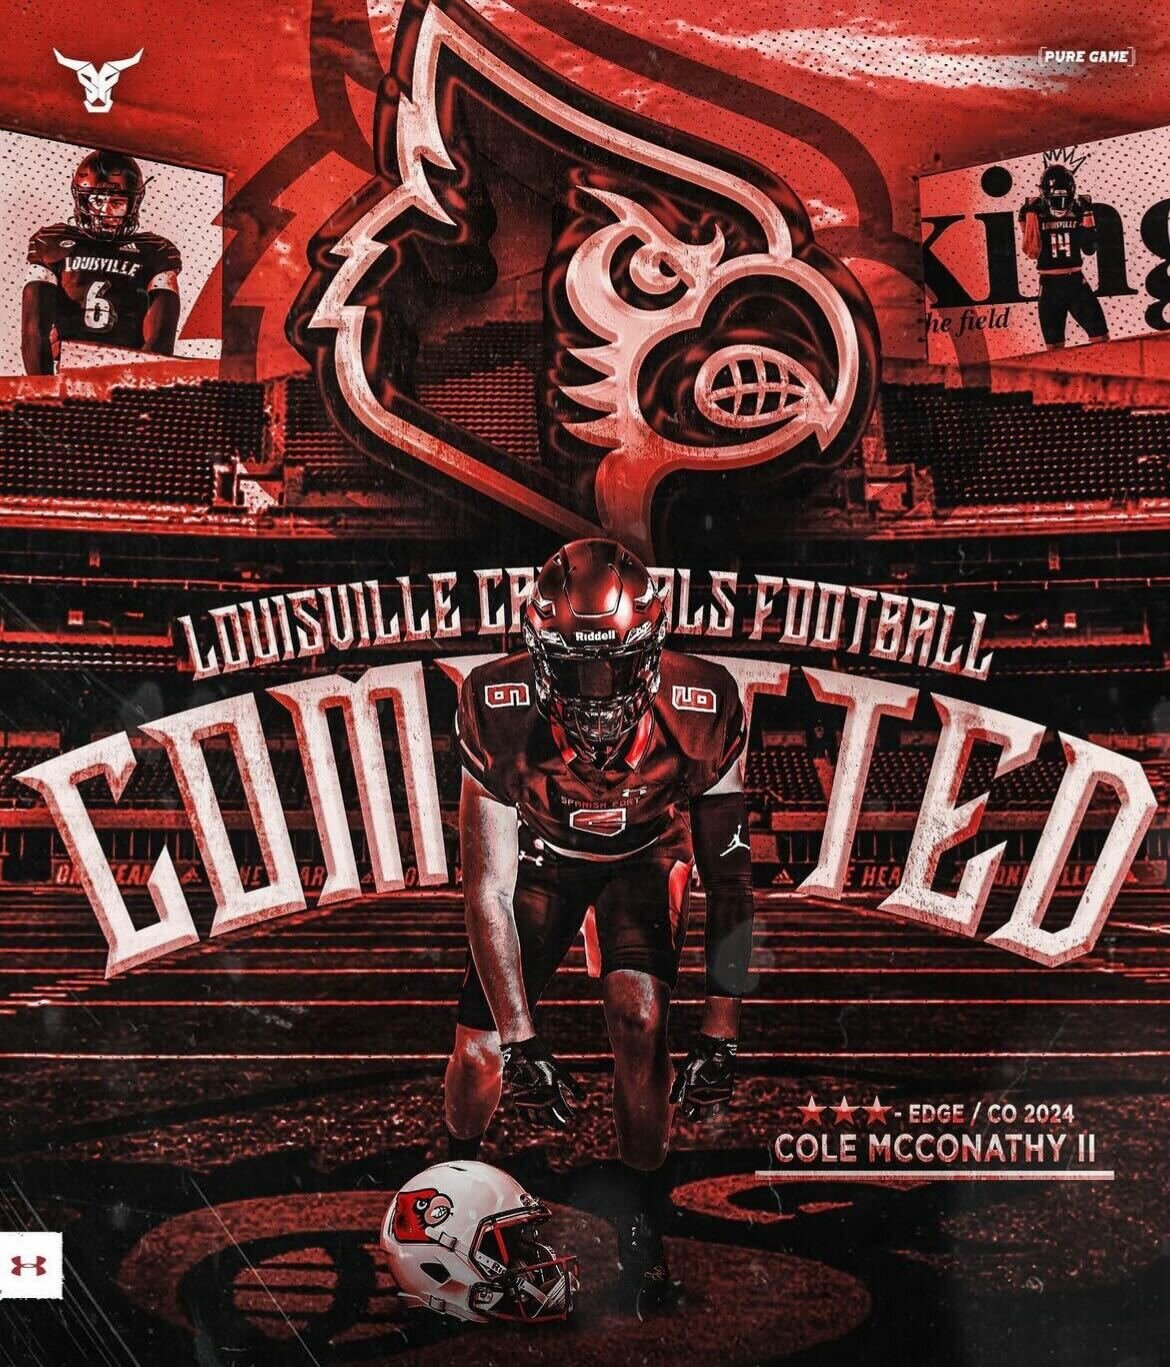 On his birthday, July 6, Cole McConathy announced his commitment to the Louisville football program. 247Sports ranked the 3-star prospect 66th at his position nationally and 38th overall in Alabama.